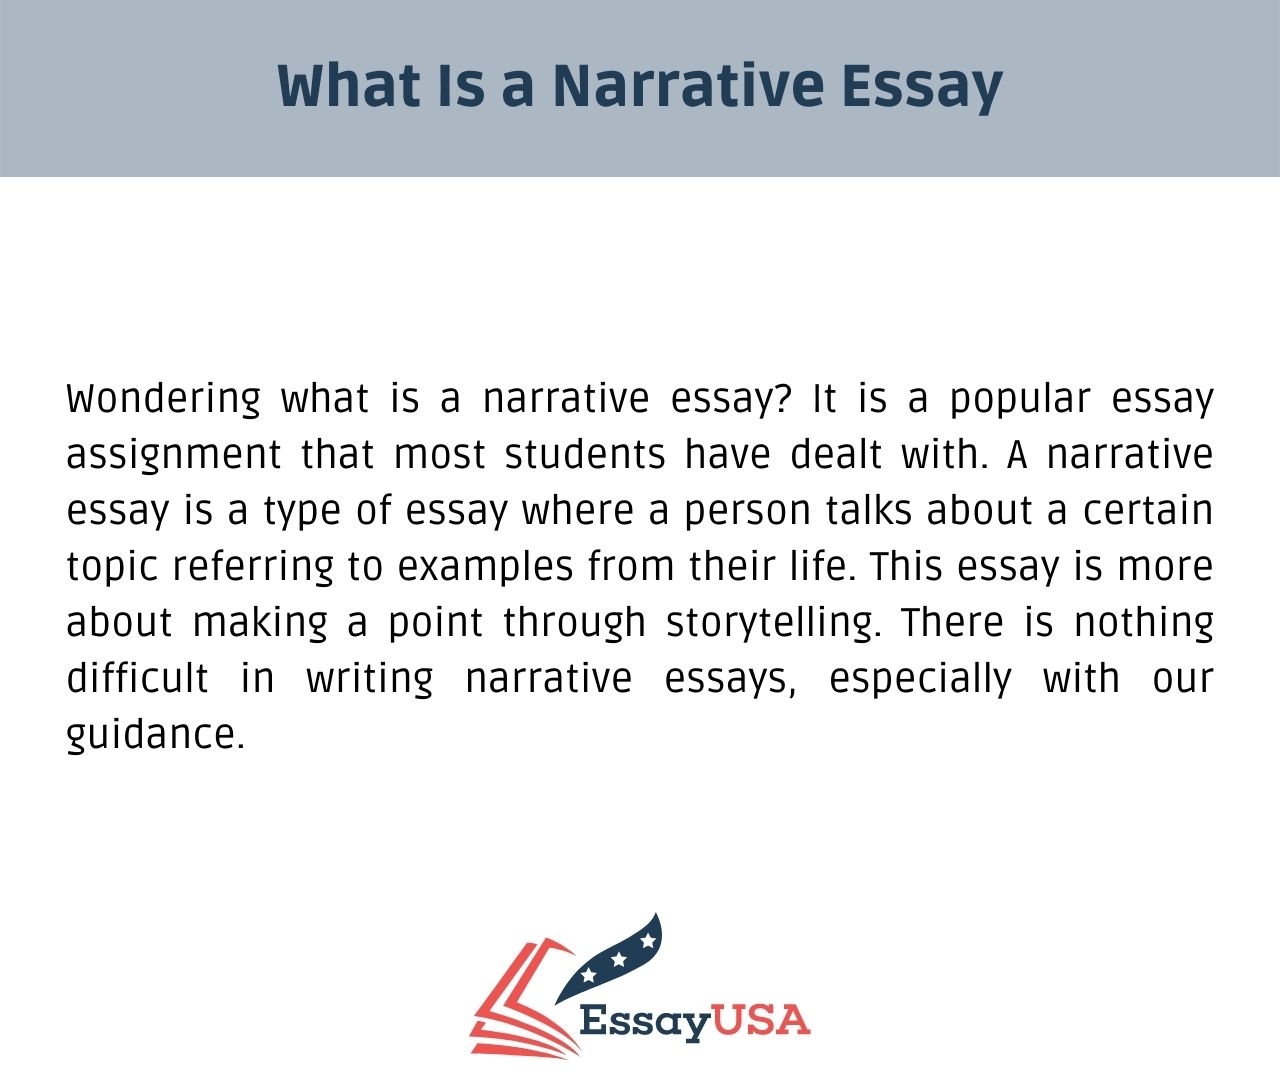 tips to writing a narrative essay